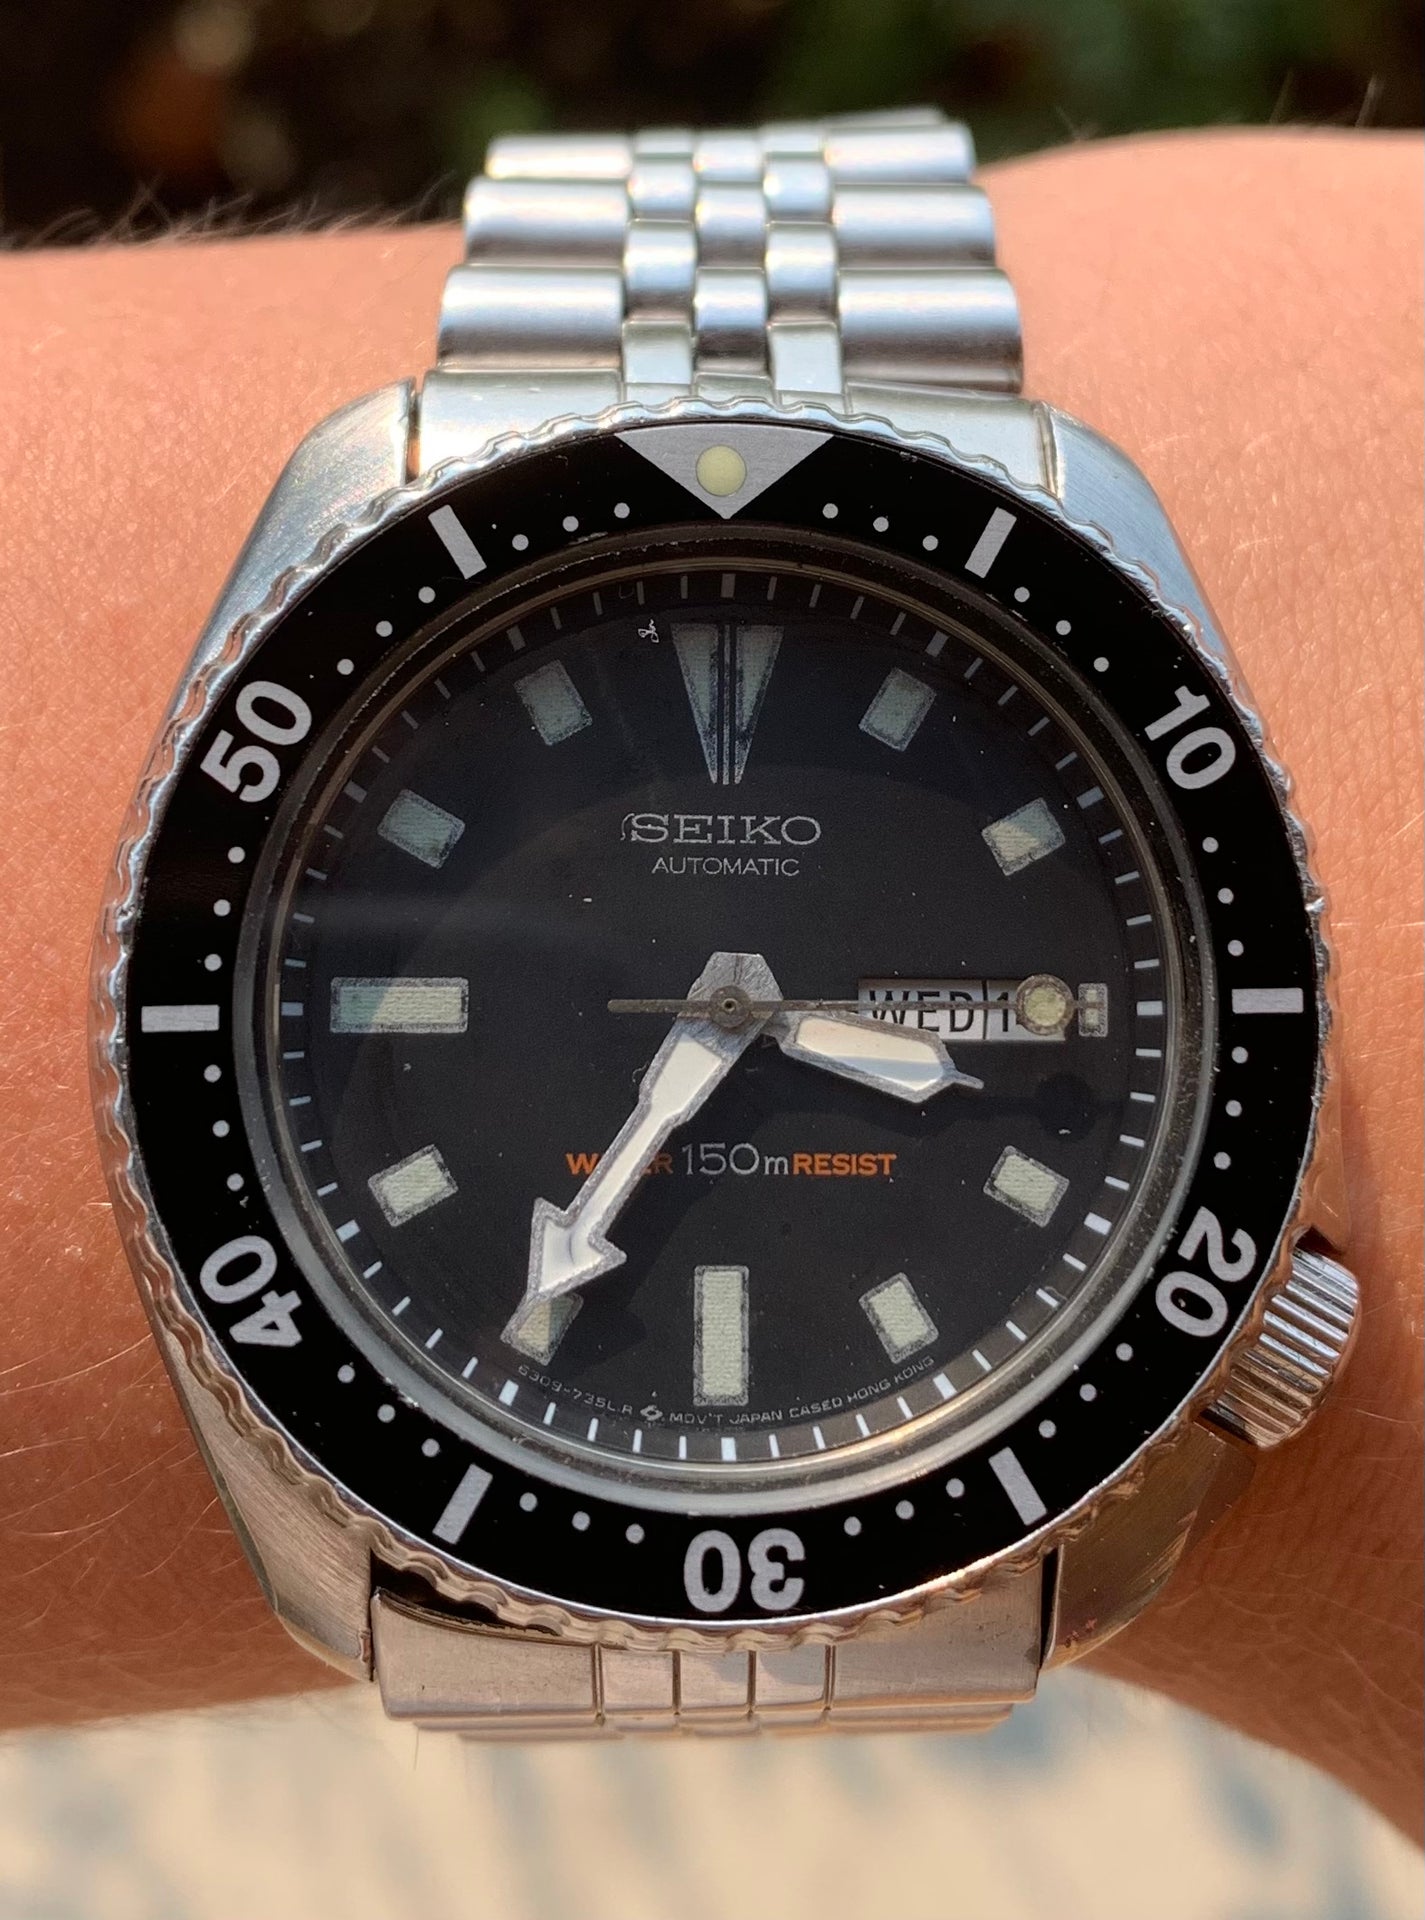 Know anything about this watch? | WatchUSeek Watch Forums